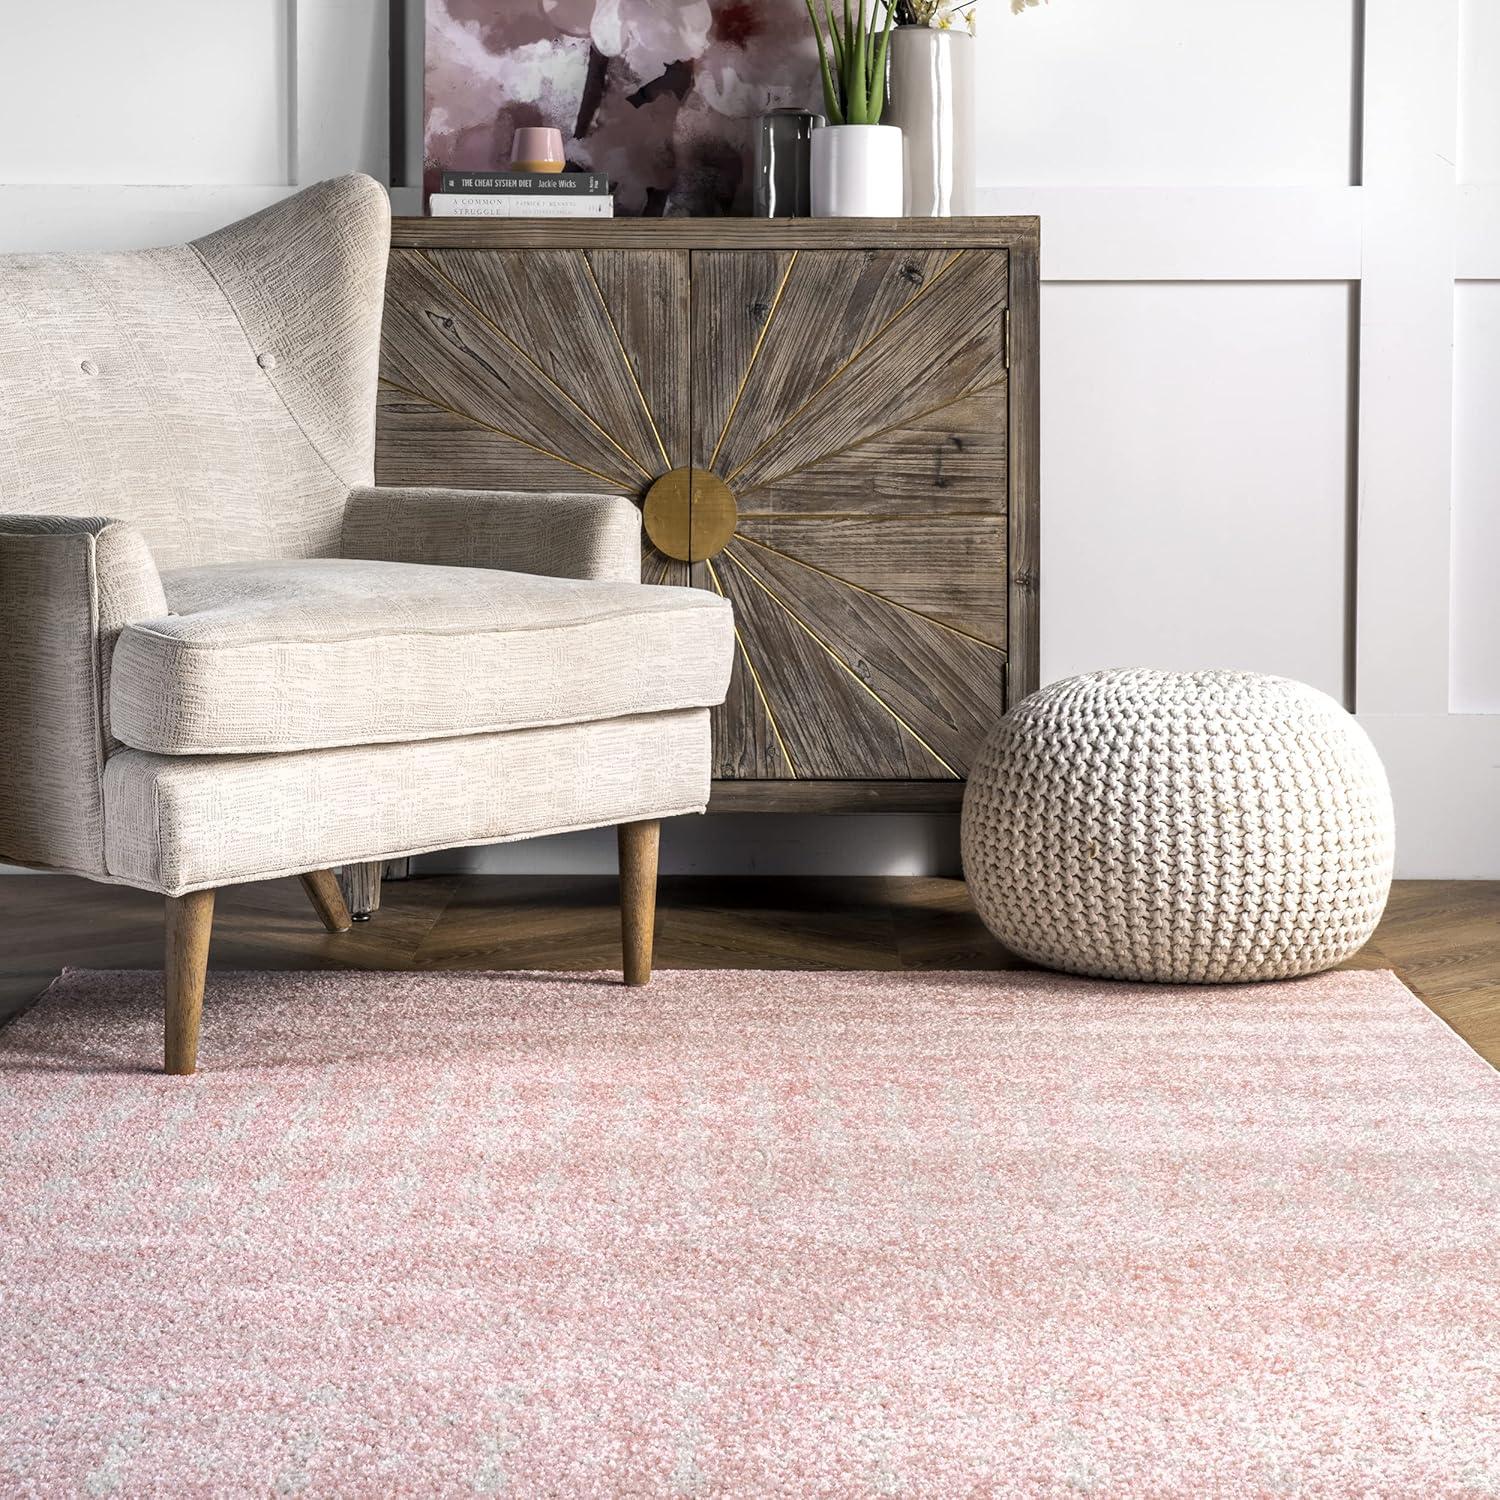 Chic Geometric Pink 5' x 7' Synthetic Easy-Care Area Rug